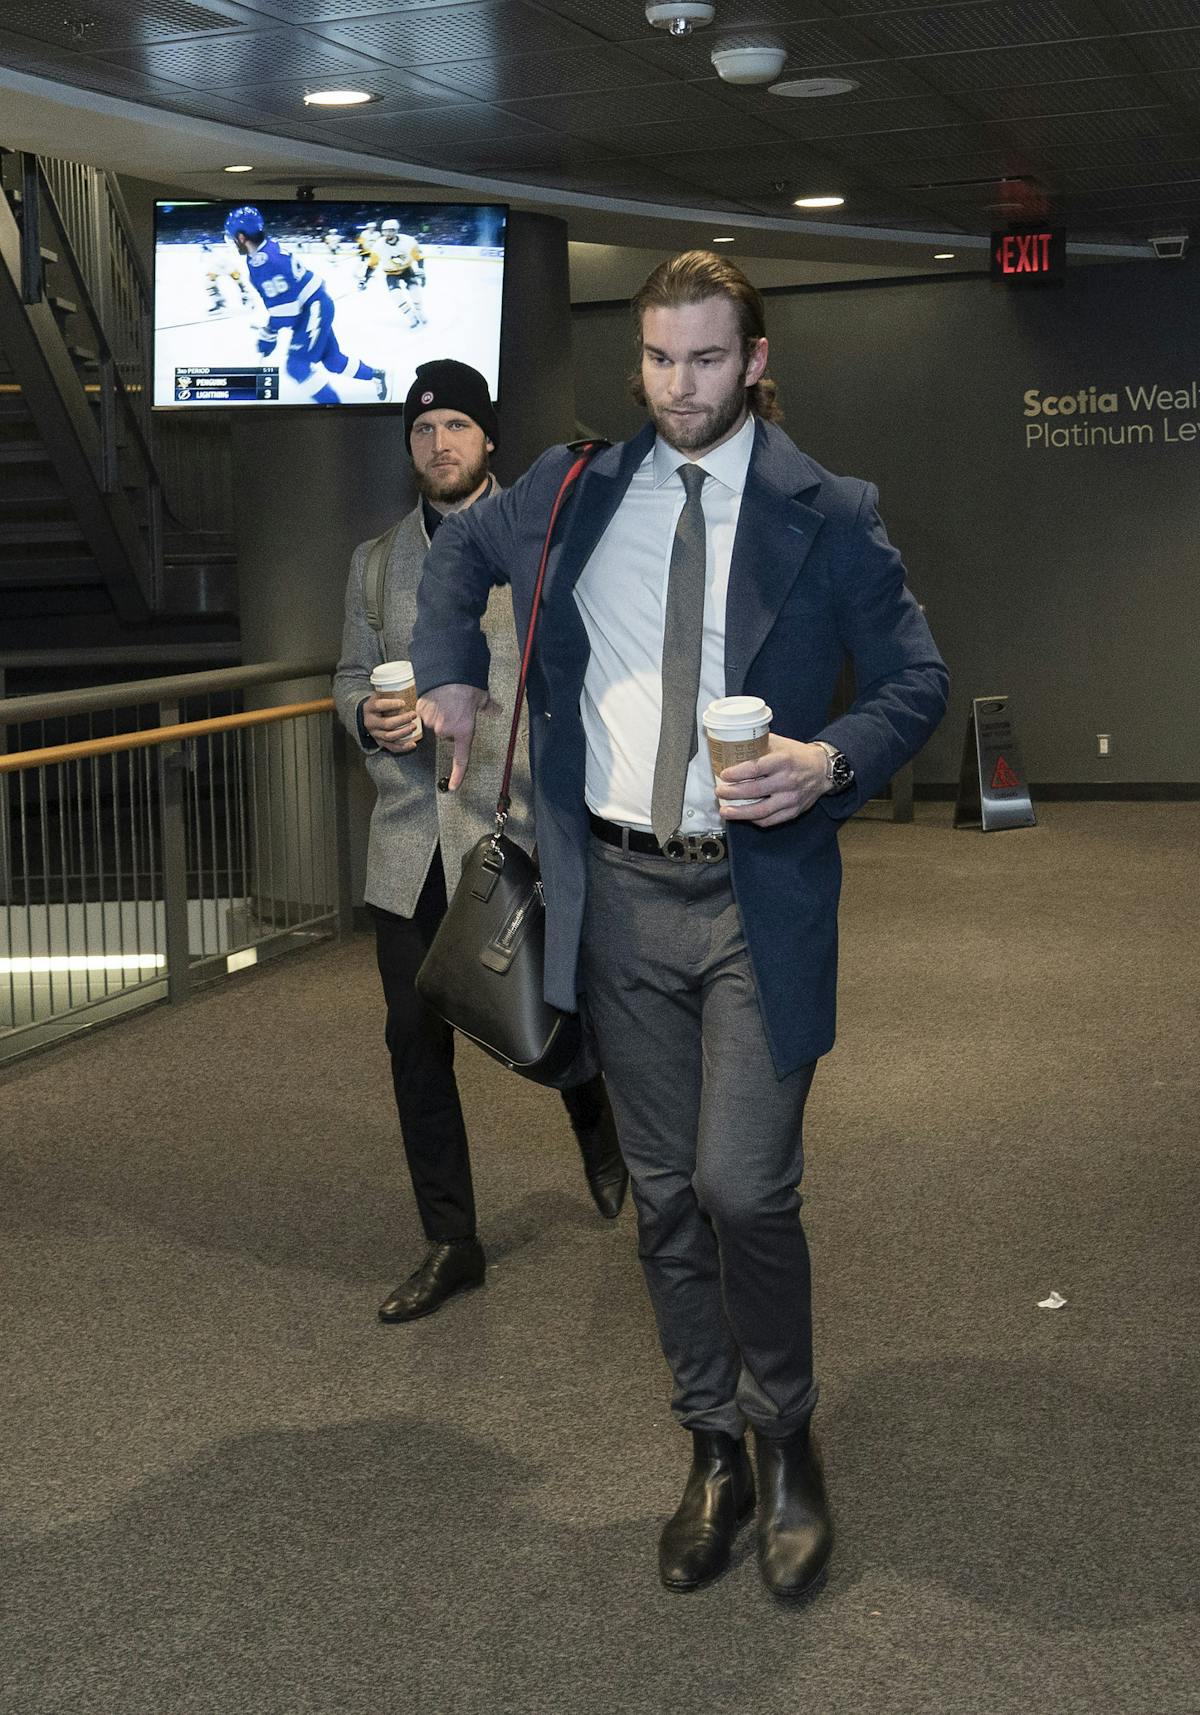 The NHL should abolish the suit and tie dress code